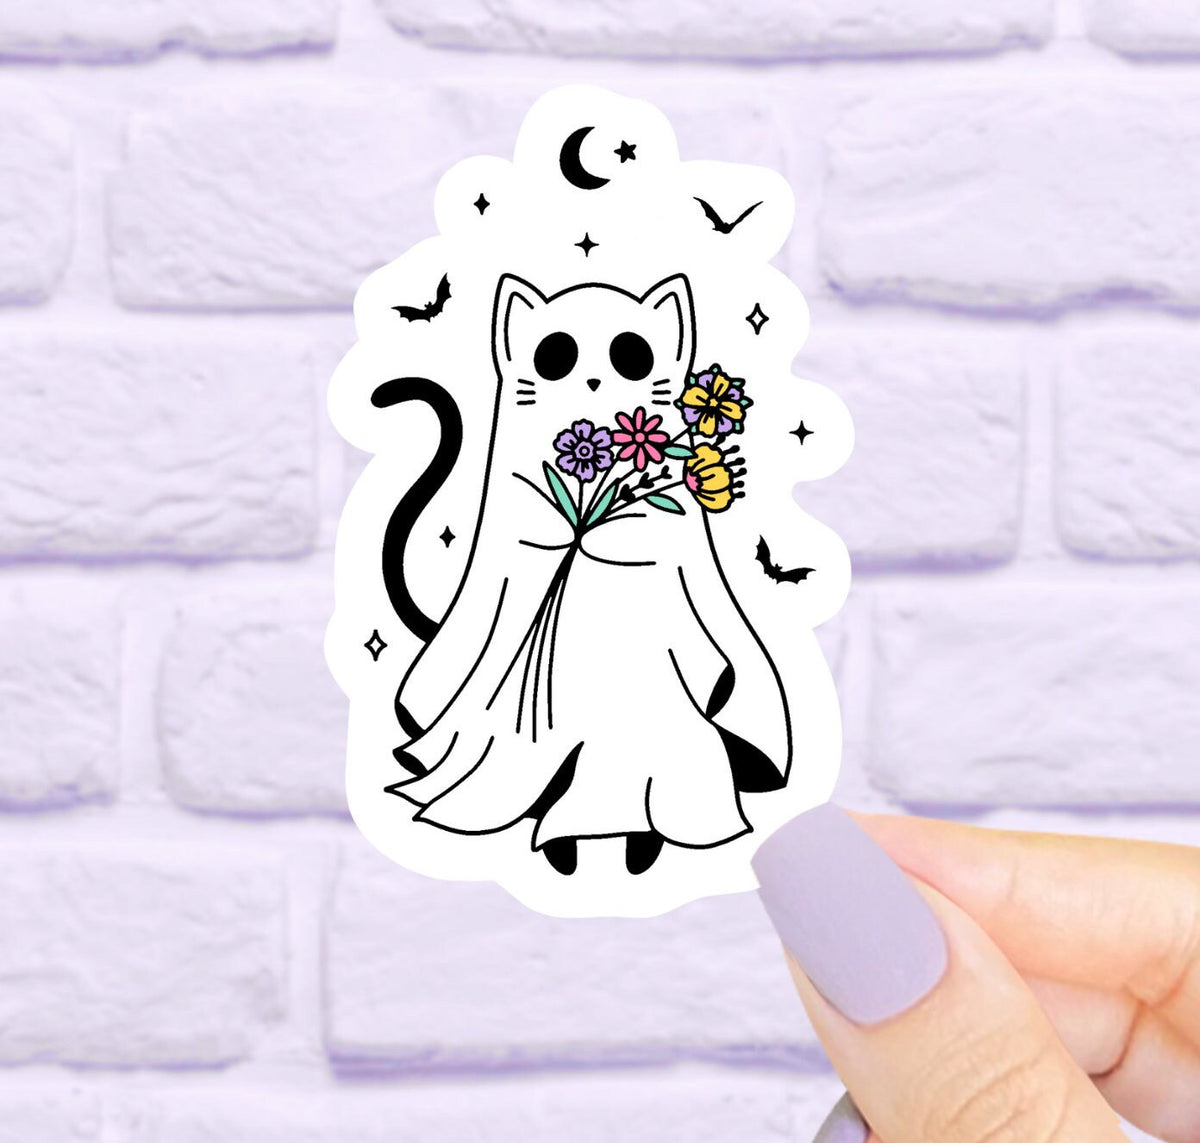 Kindle Stickers, Cat Stickers, Halloween Stickers, Cat Lover Gifts, Cute Stickers, Ghost Stickers